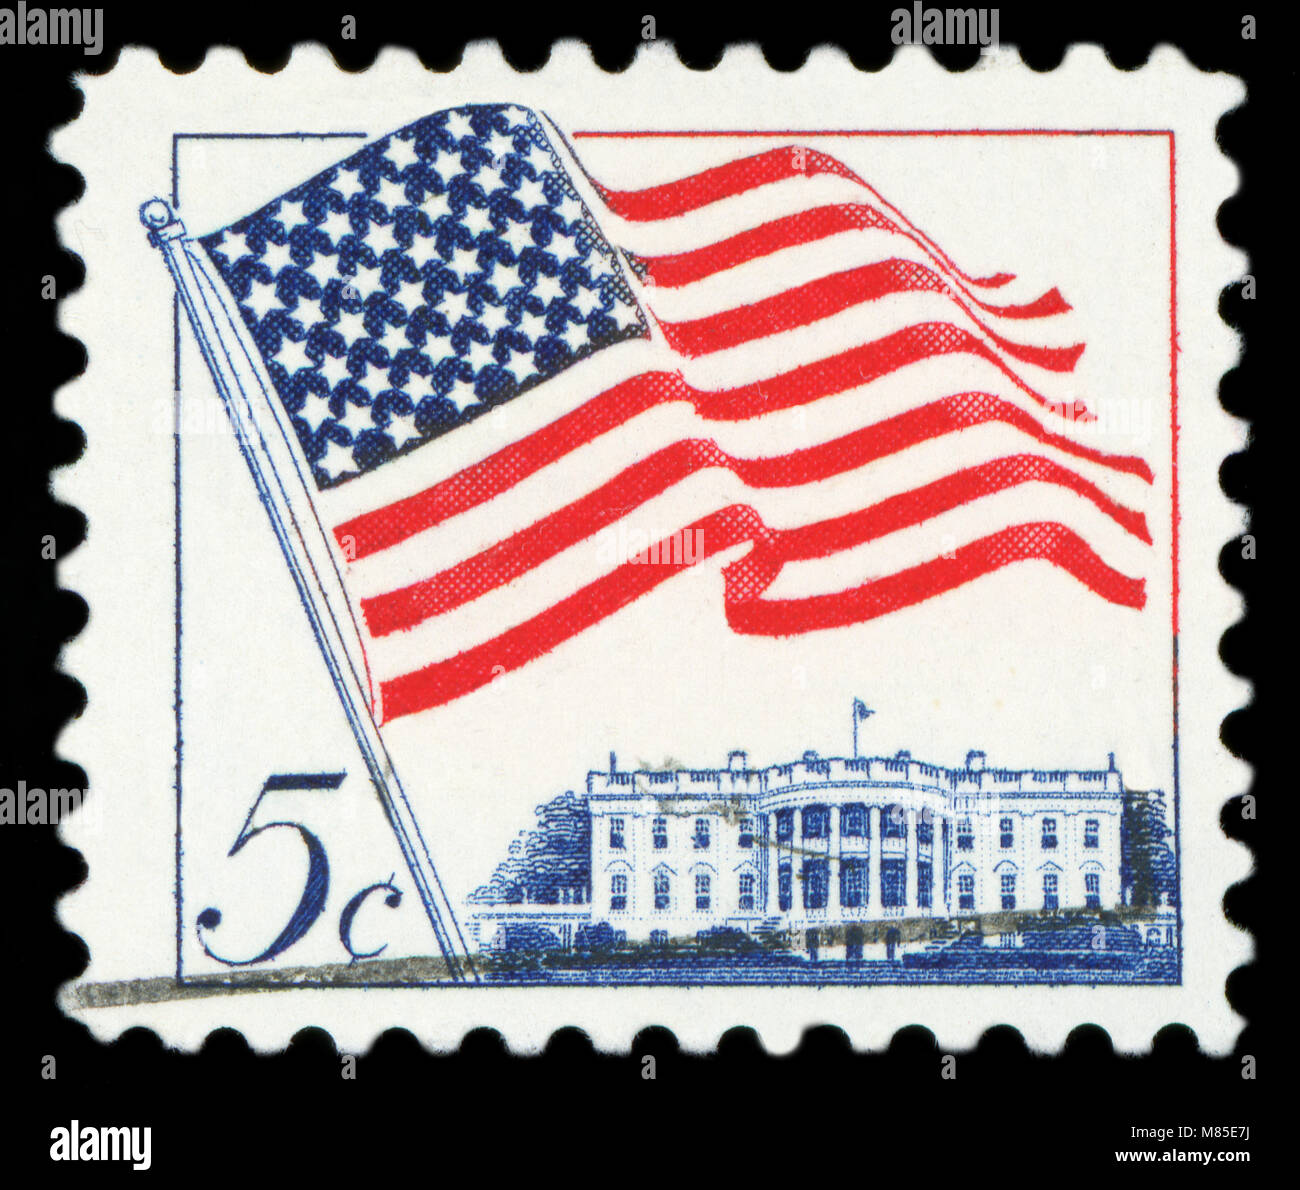 UNITED STATES OF AMERICA - CIRCA 1962: A used postage stamp from the USA depicting an illustration of the American flag and White House in Washington Stock Photo